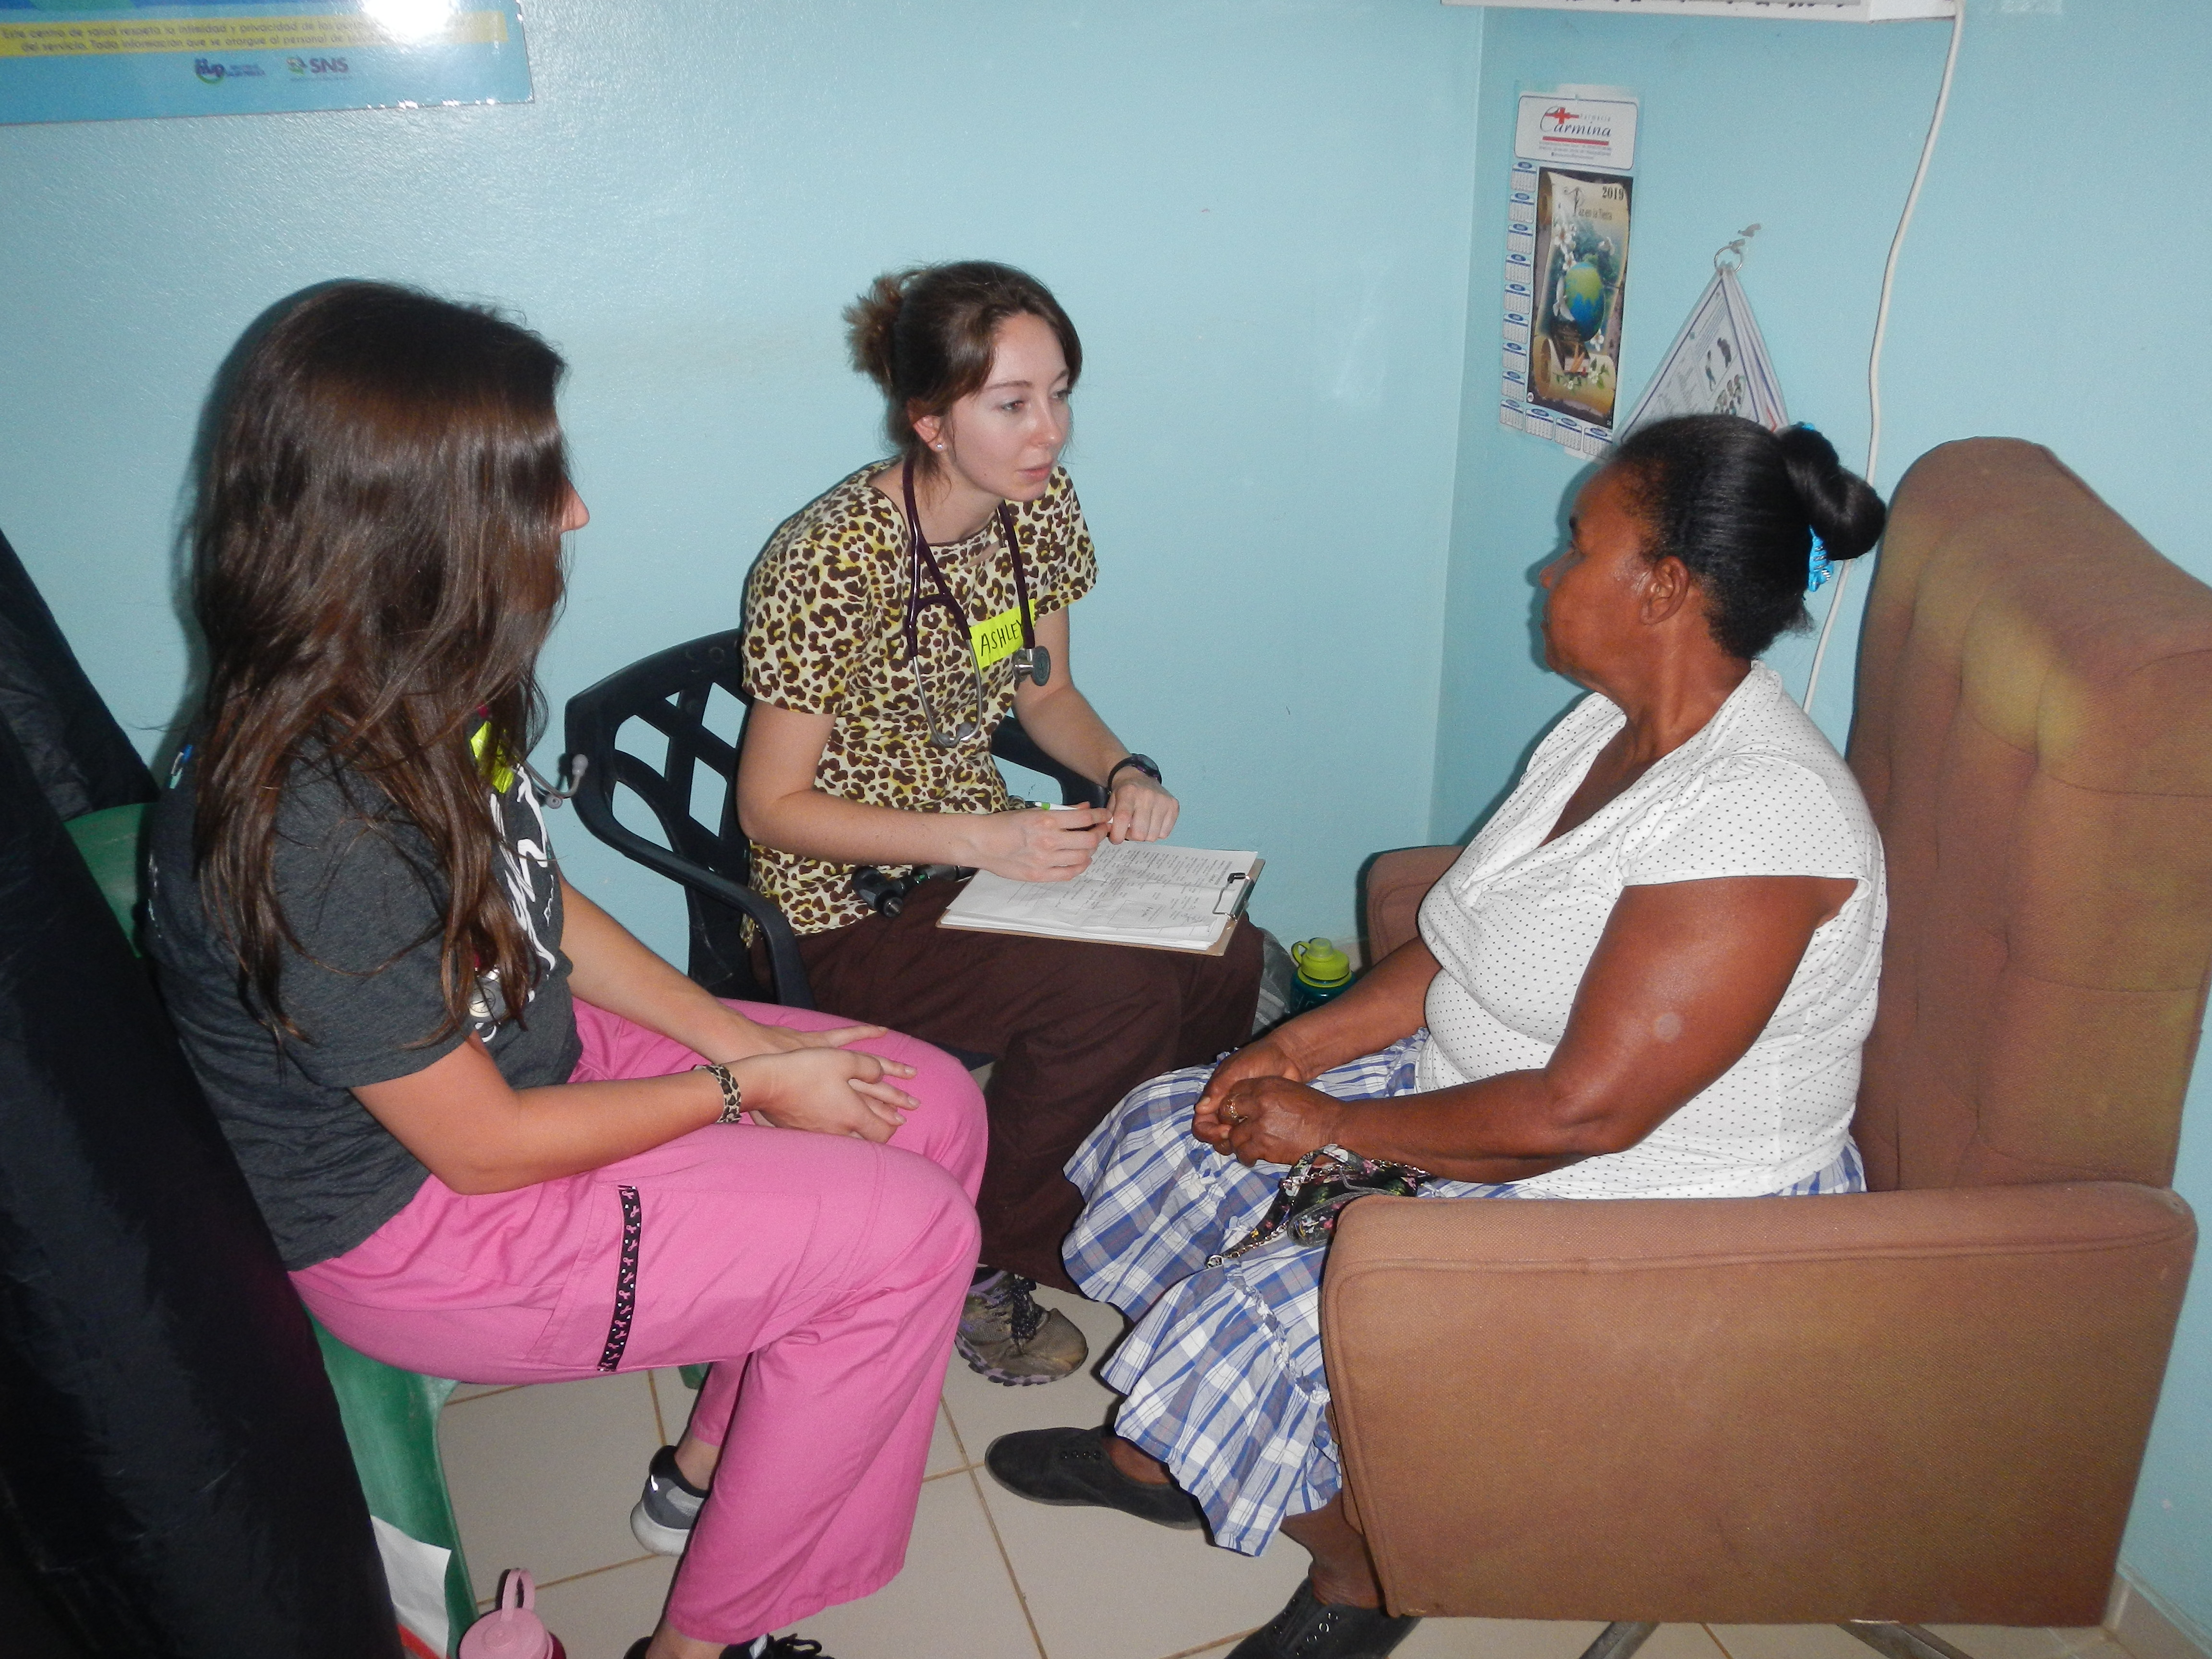 A patient is treated by ISU students and clinicians in the Dominican Republic